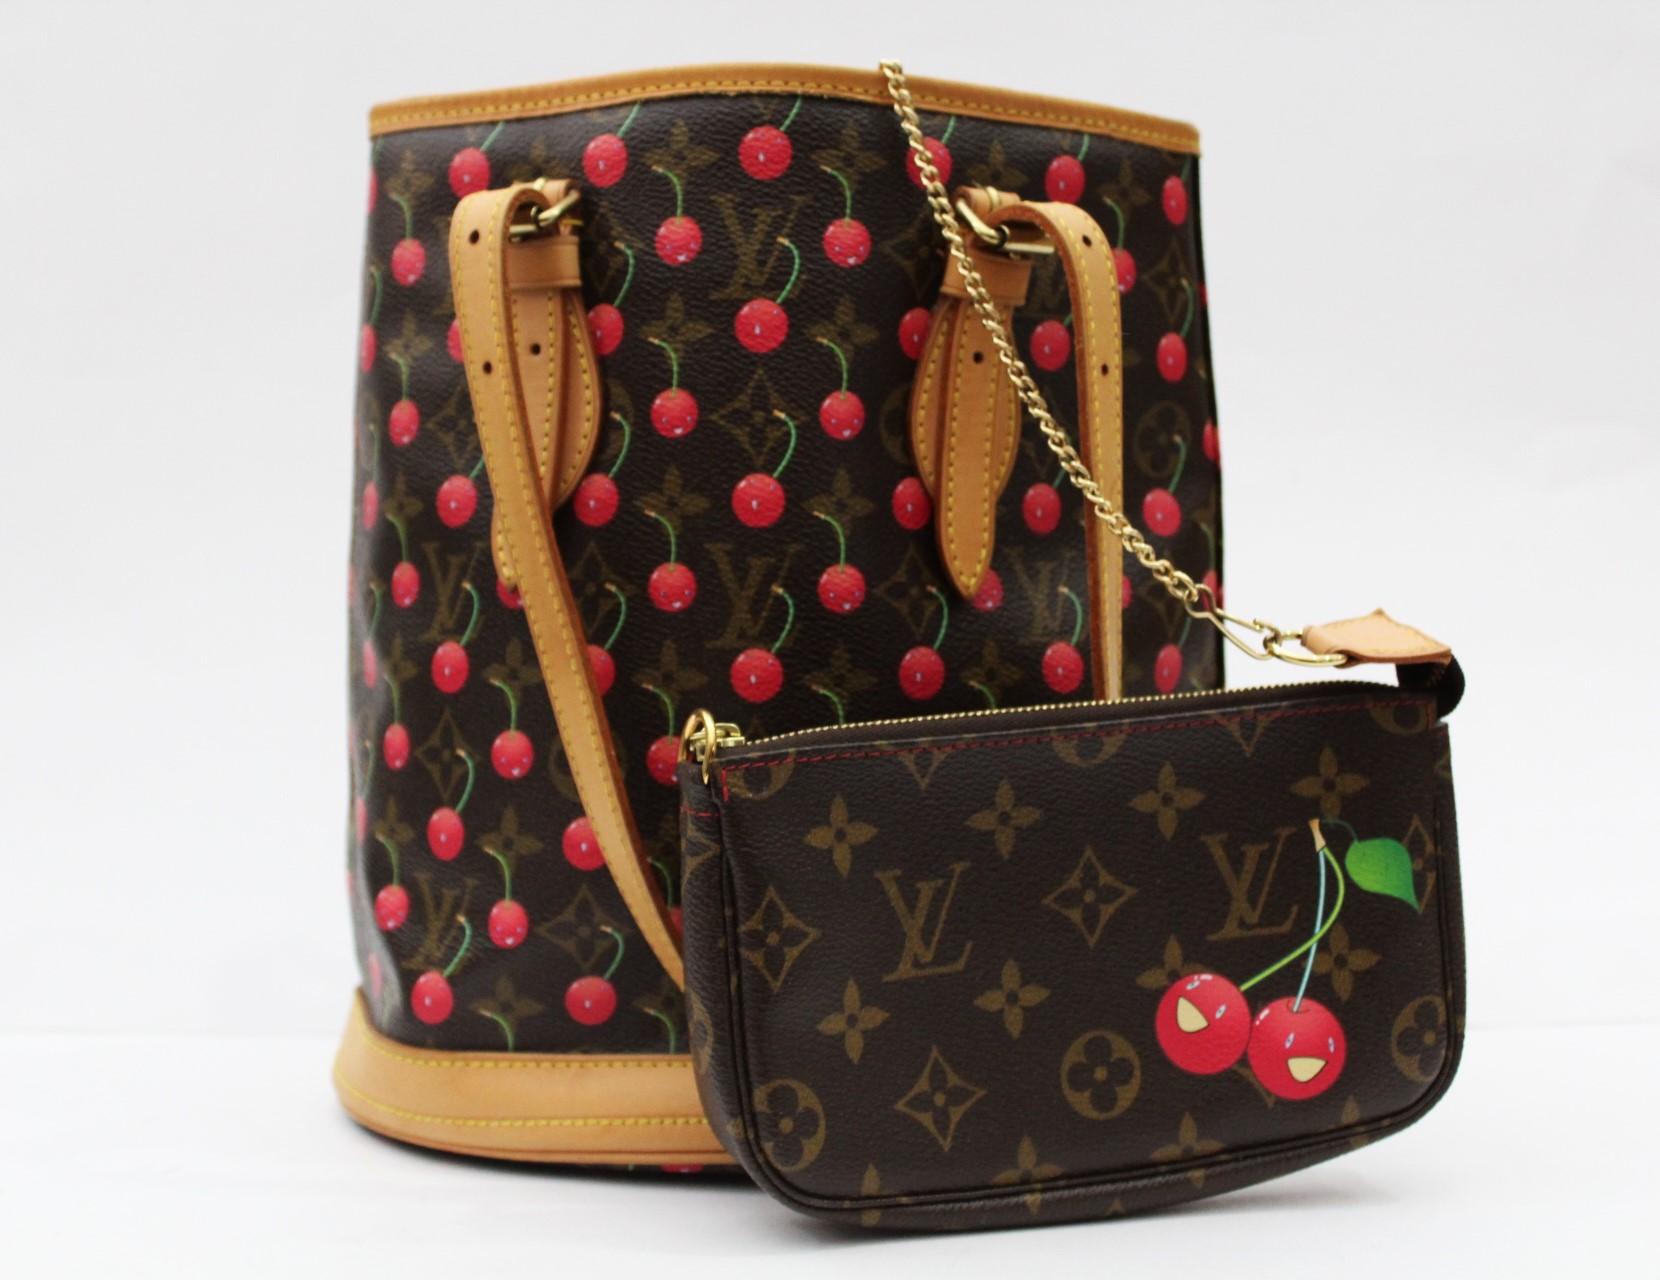 Limited edition Louis Vuitton Monogram Cerises Cherry Bucket Bag. This popular bucket bag style has the iconic monogram canvas adorned with bright cheerful cherries. It also comes with a removable Louis Vuitton Cherry Accessory Pochette that is